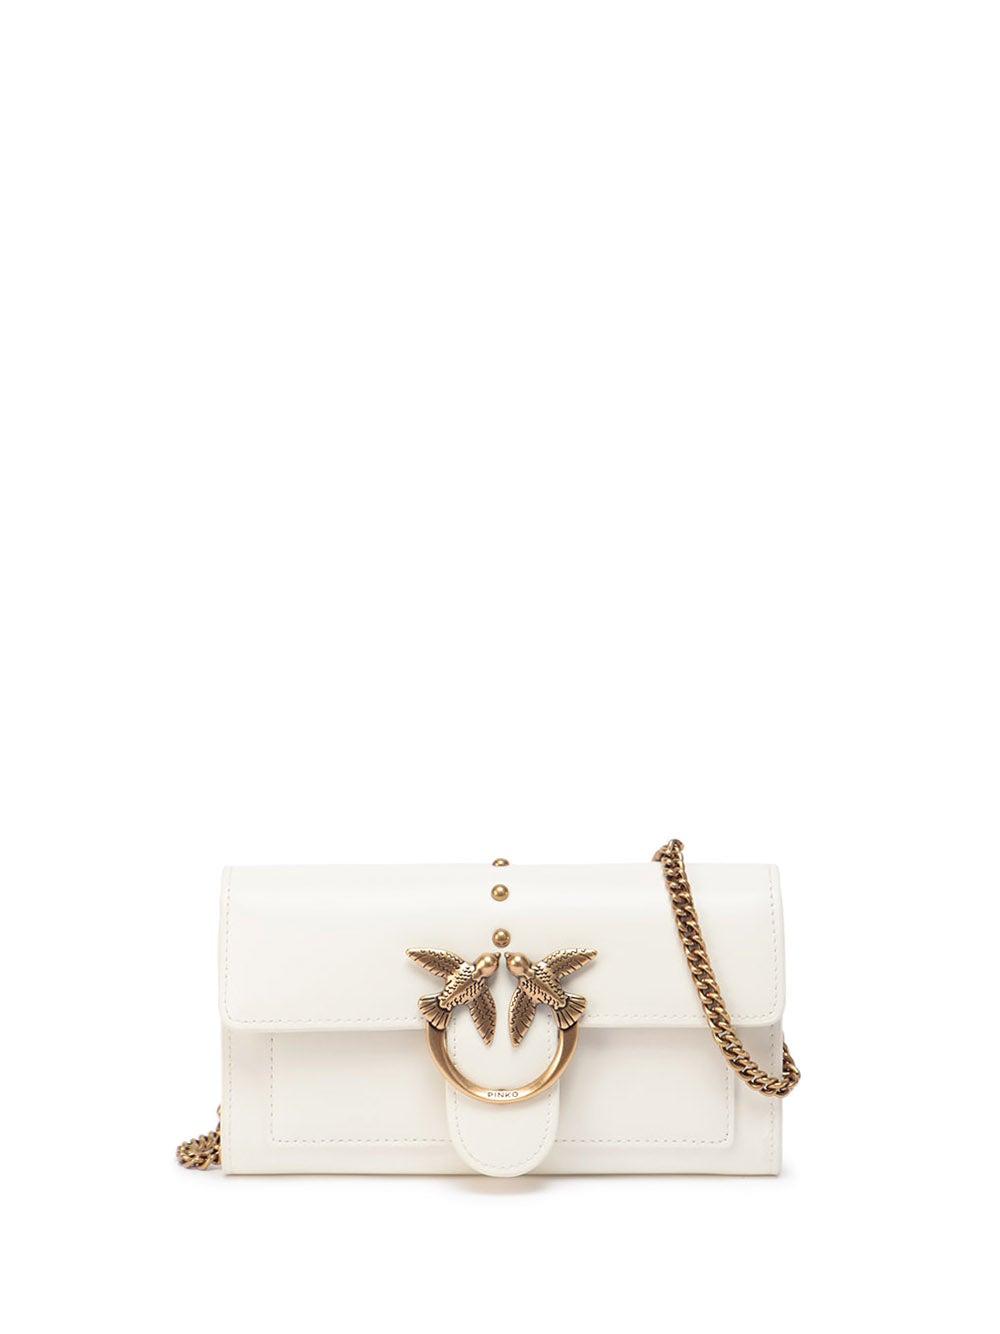 Pinko Leather Love Simply Shoulder Bag in White - Lyst